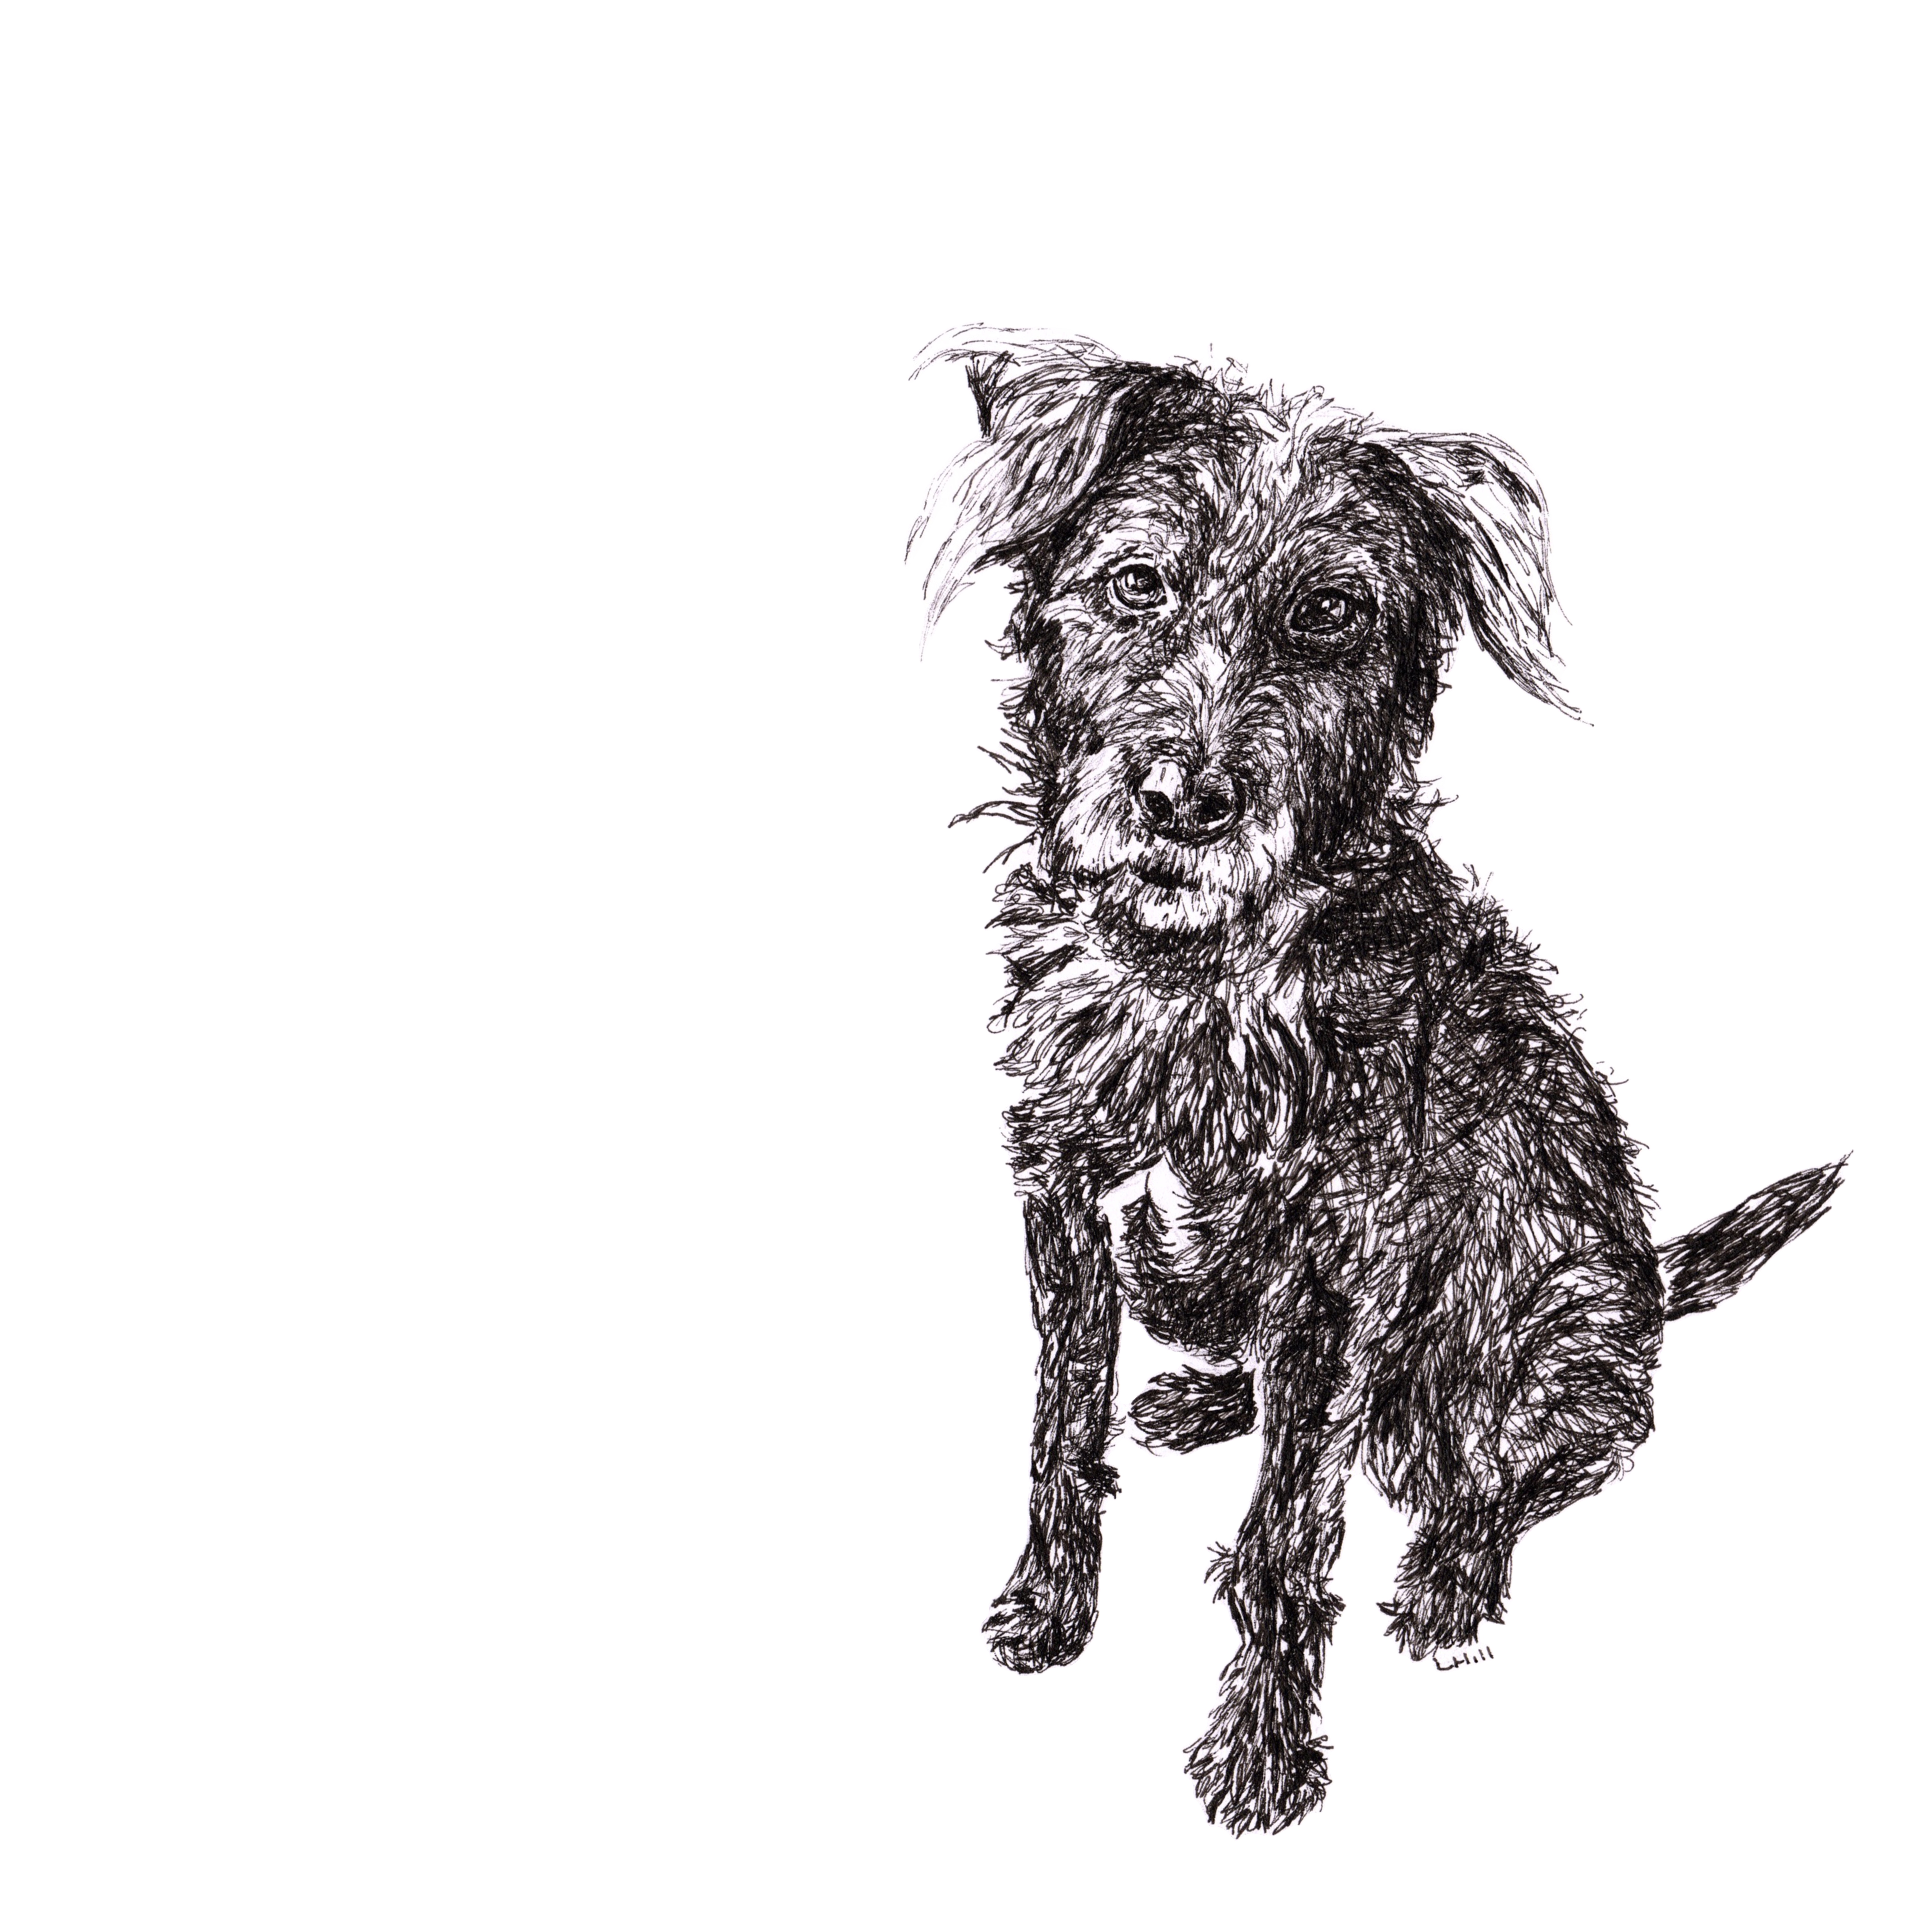 Patterdale Terrier pen and ink illustration by Louisa Hill